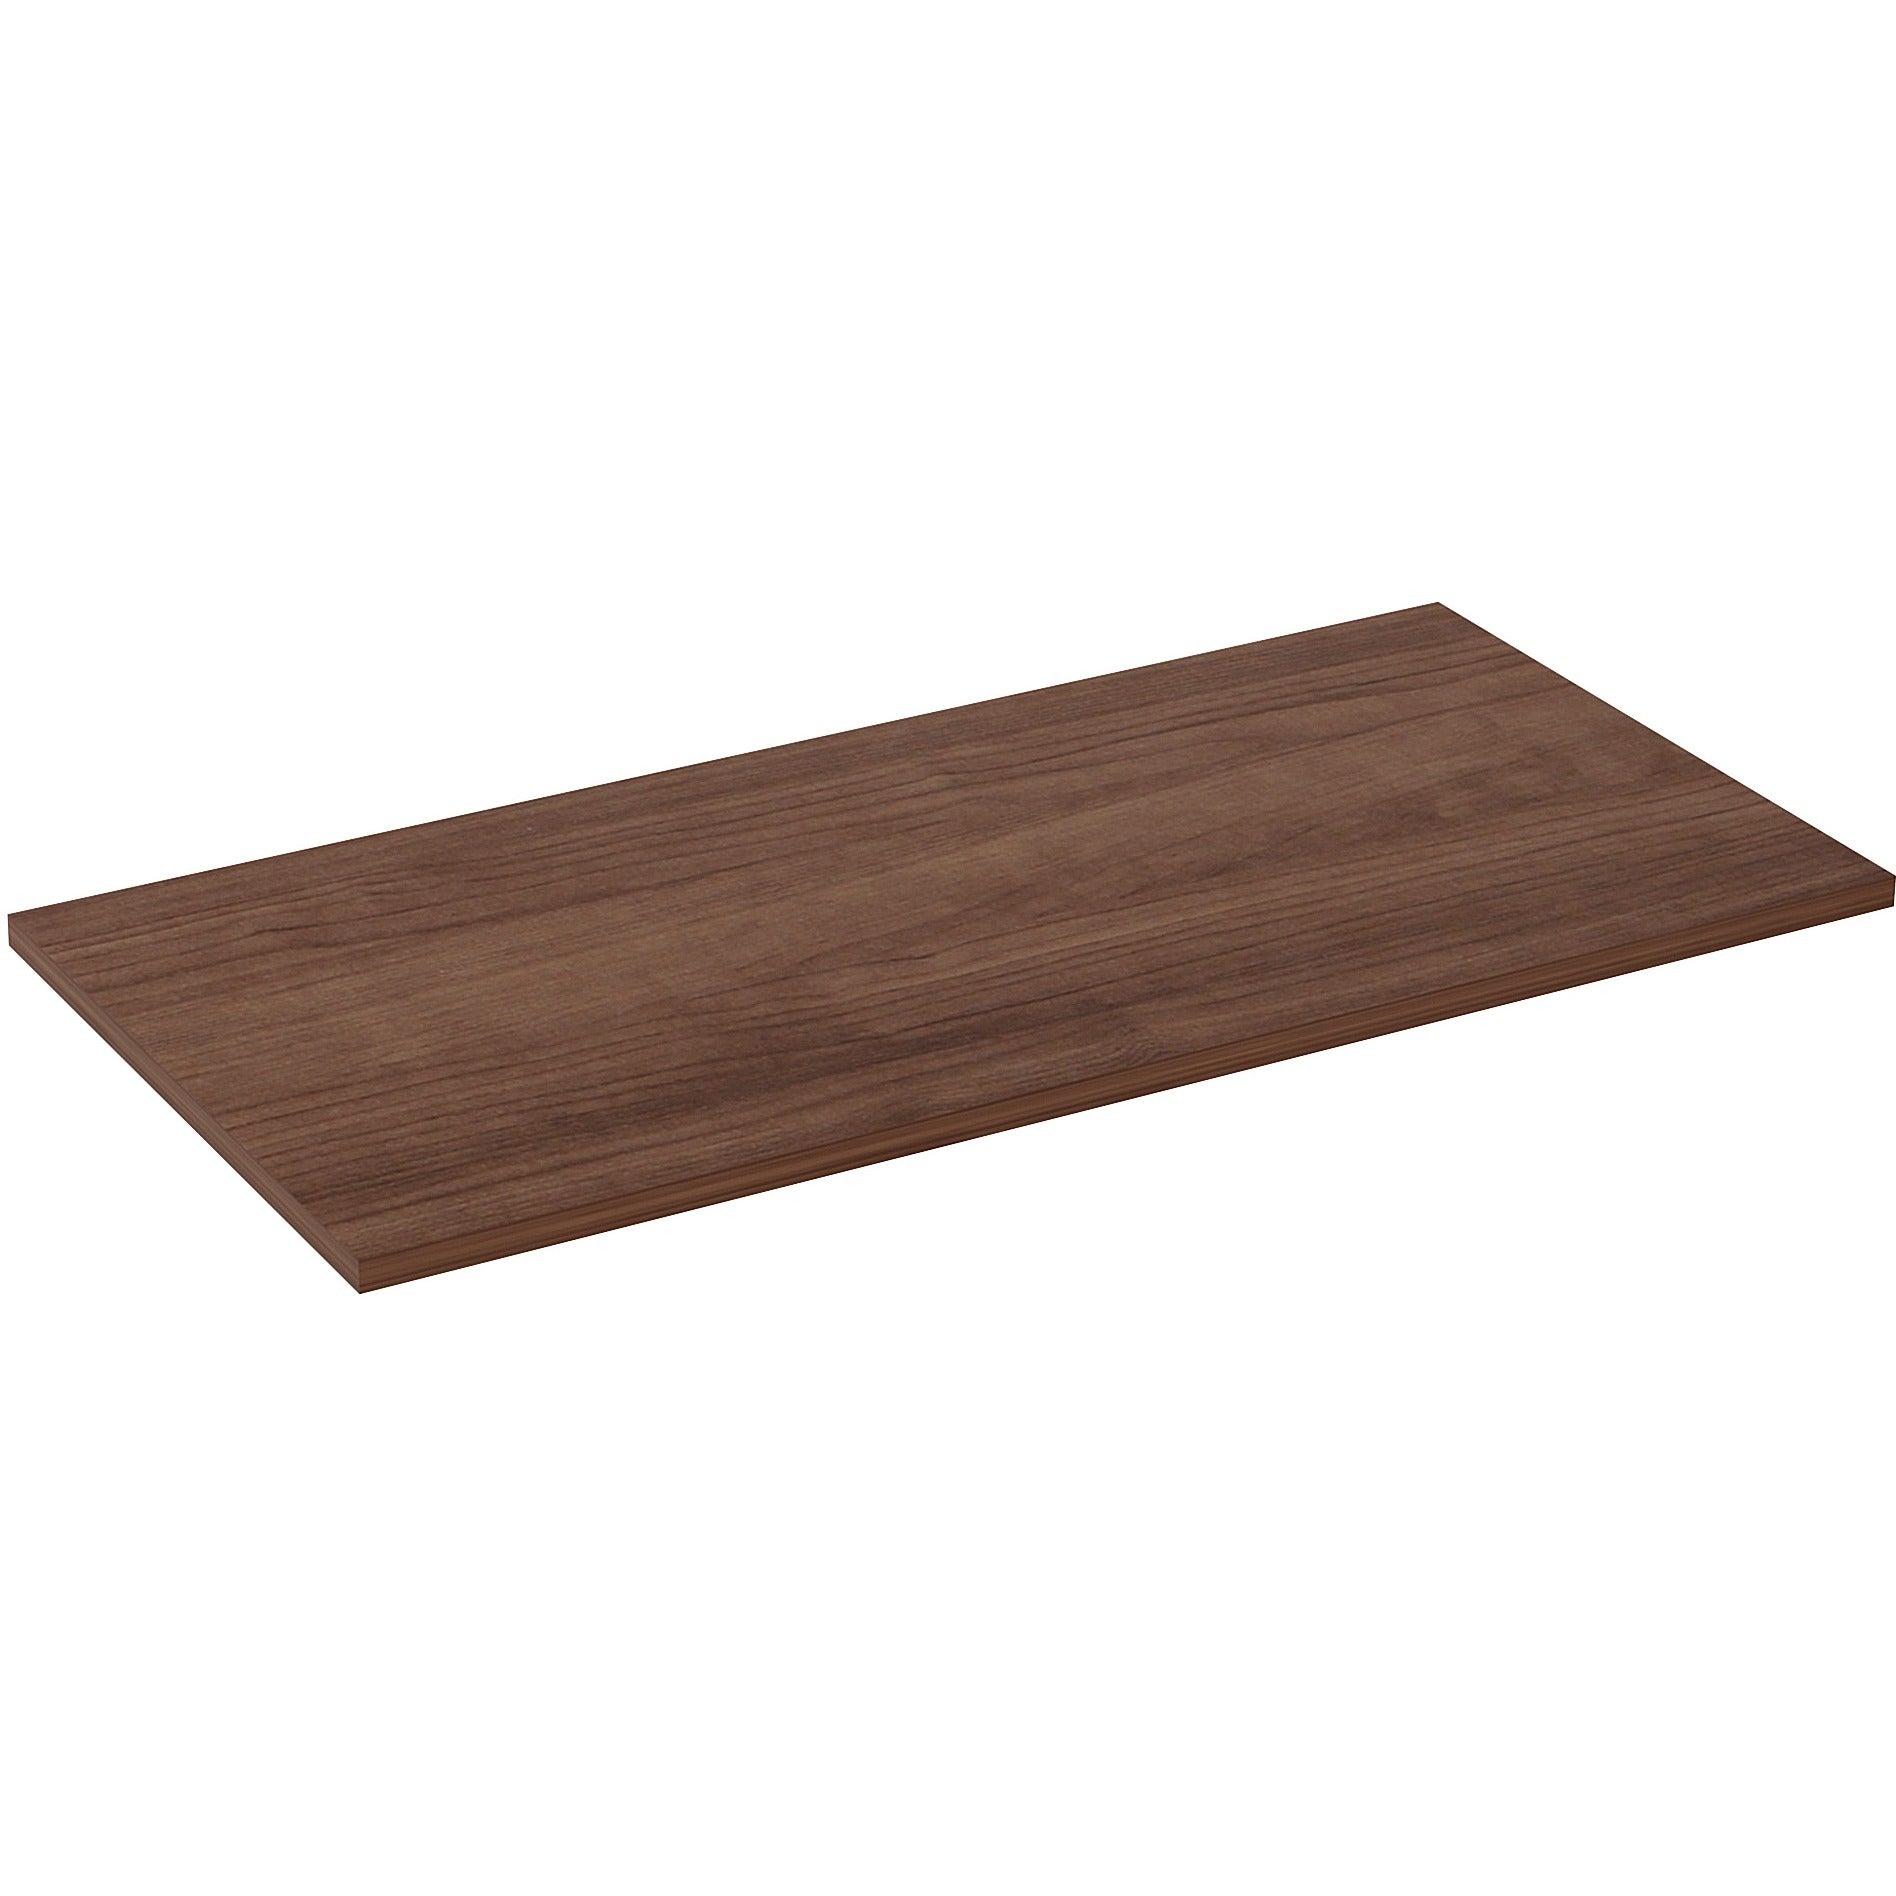 lorell-relevance-series-tabletop-for-table-topwalnut-rectangle-laminated-top-48-table-top-length-x-24-table-top-width-x-1-table-top-thickness-assembly-required-1-each_llr59638 - 3